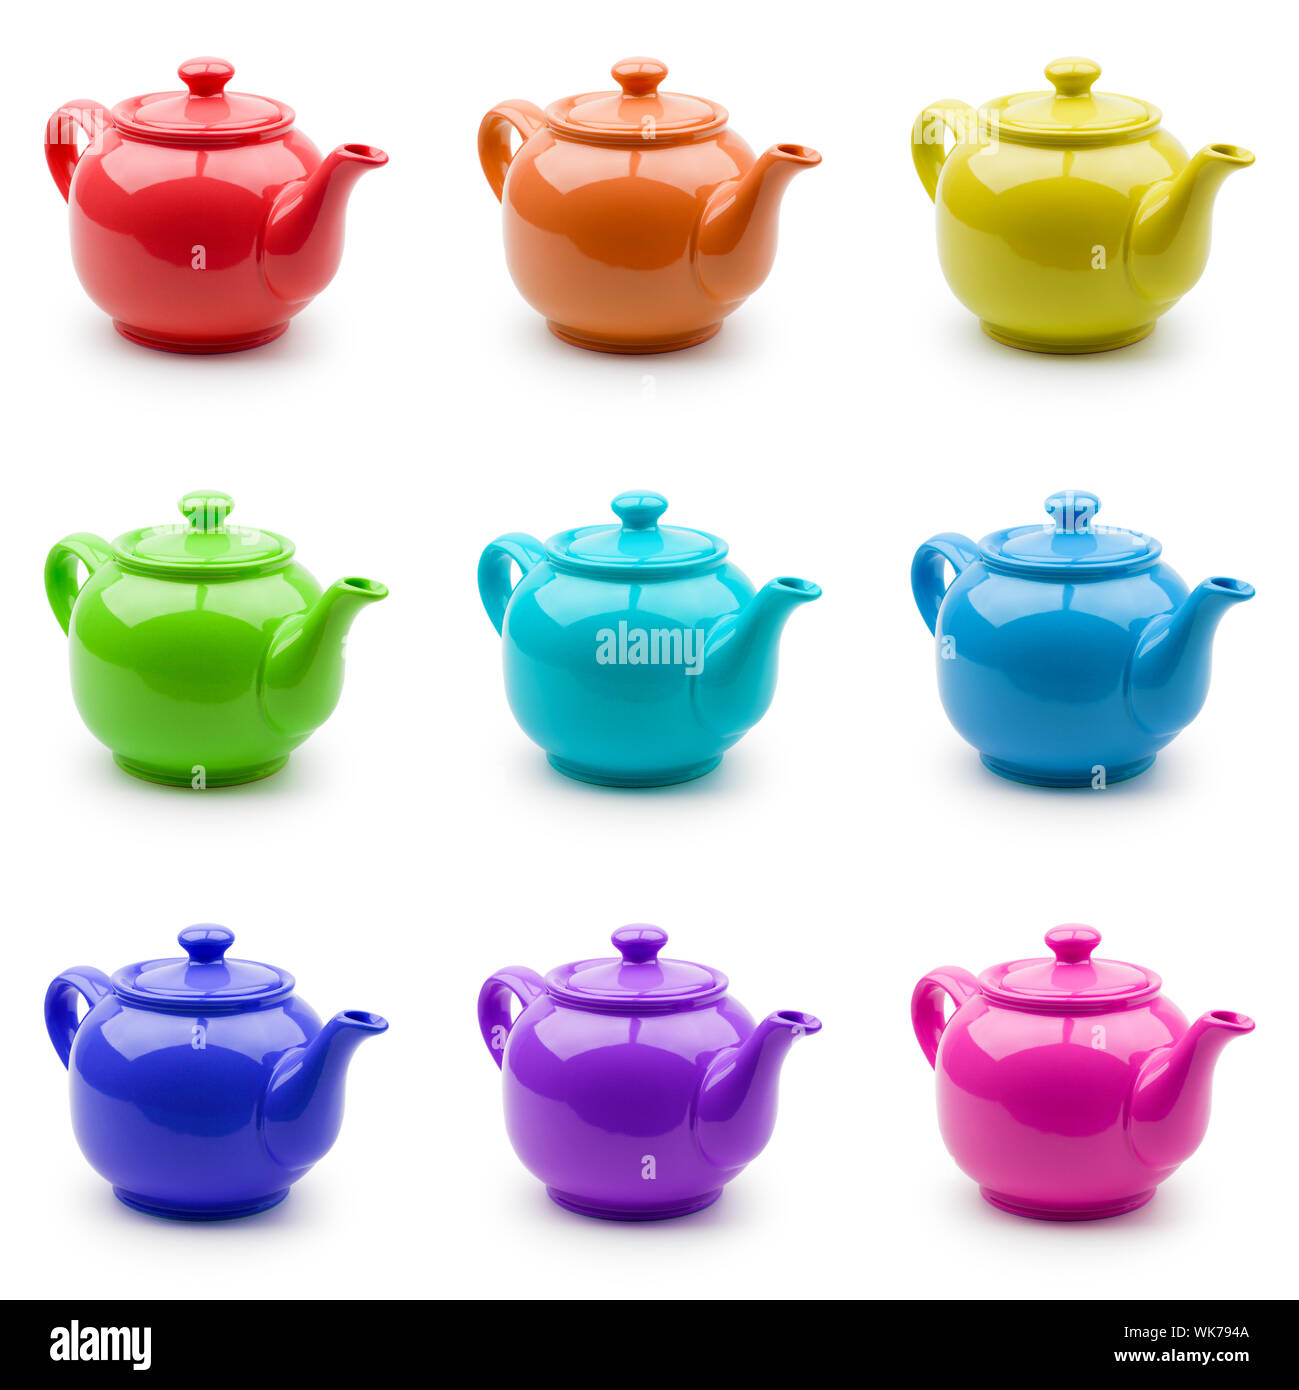 Set Of Colorful Teapots Stock Photo